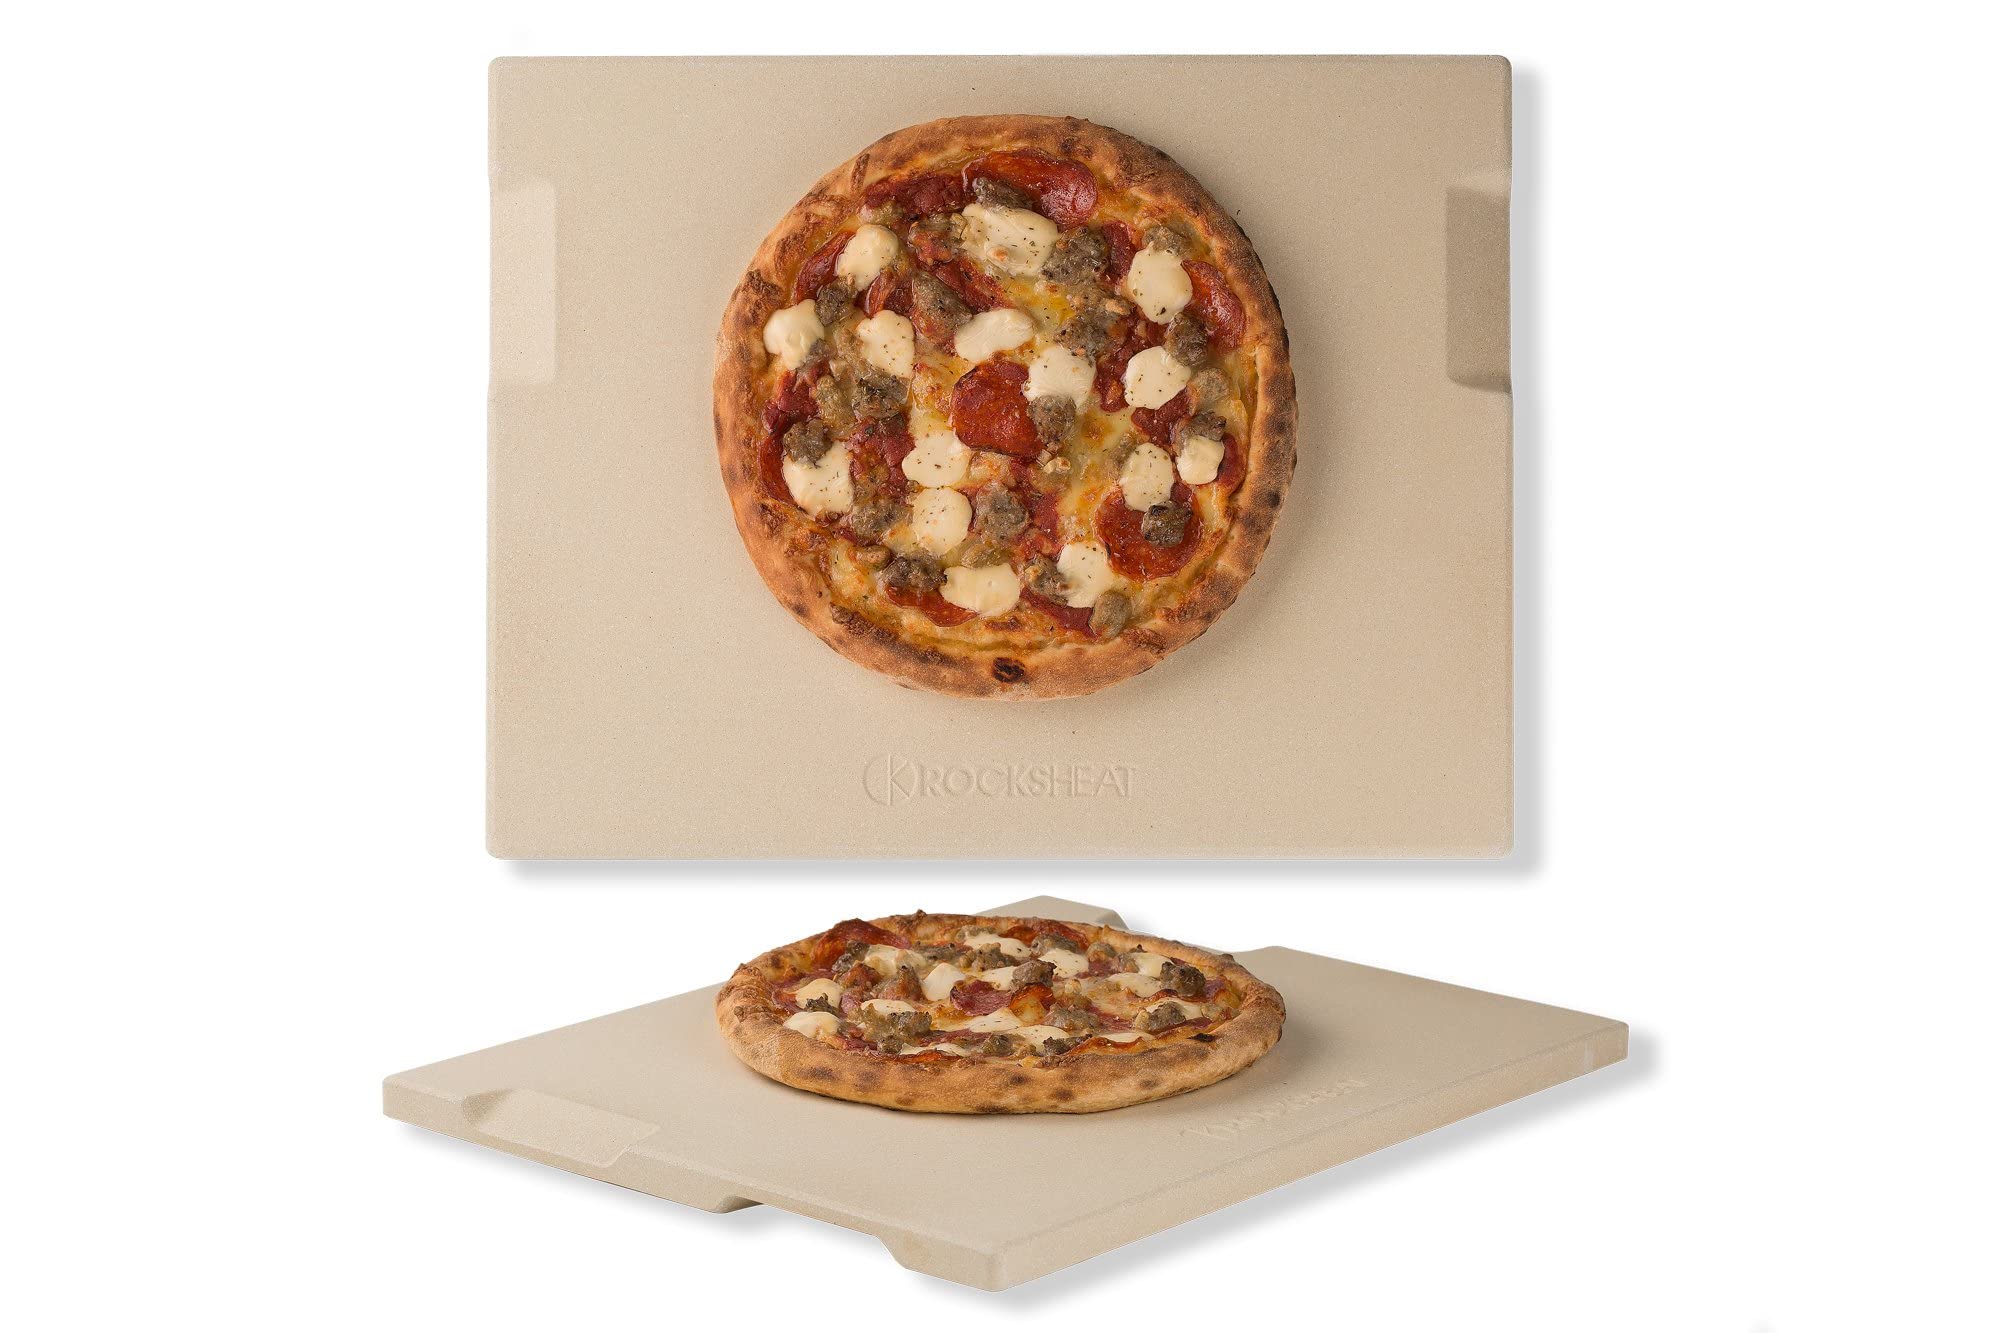 ROCKSHEAT Pizza Stone 12in x 15in Rectangular Baking & Grilling Stone, Perfect for Oven, BBQ and Grill. Innovative Double - faced Built - in 4 Handles  - $24.99